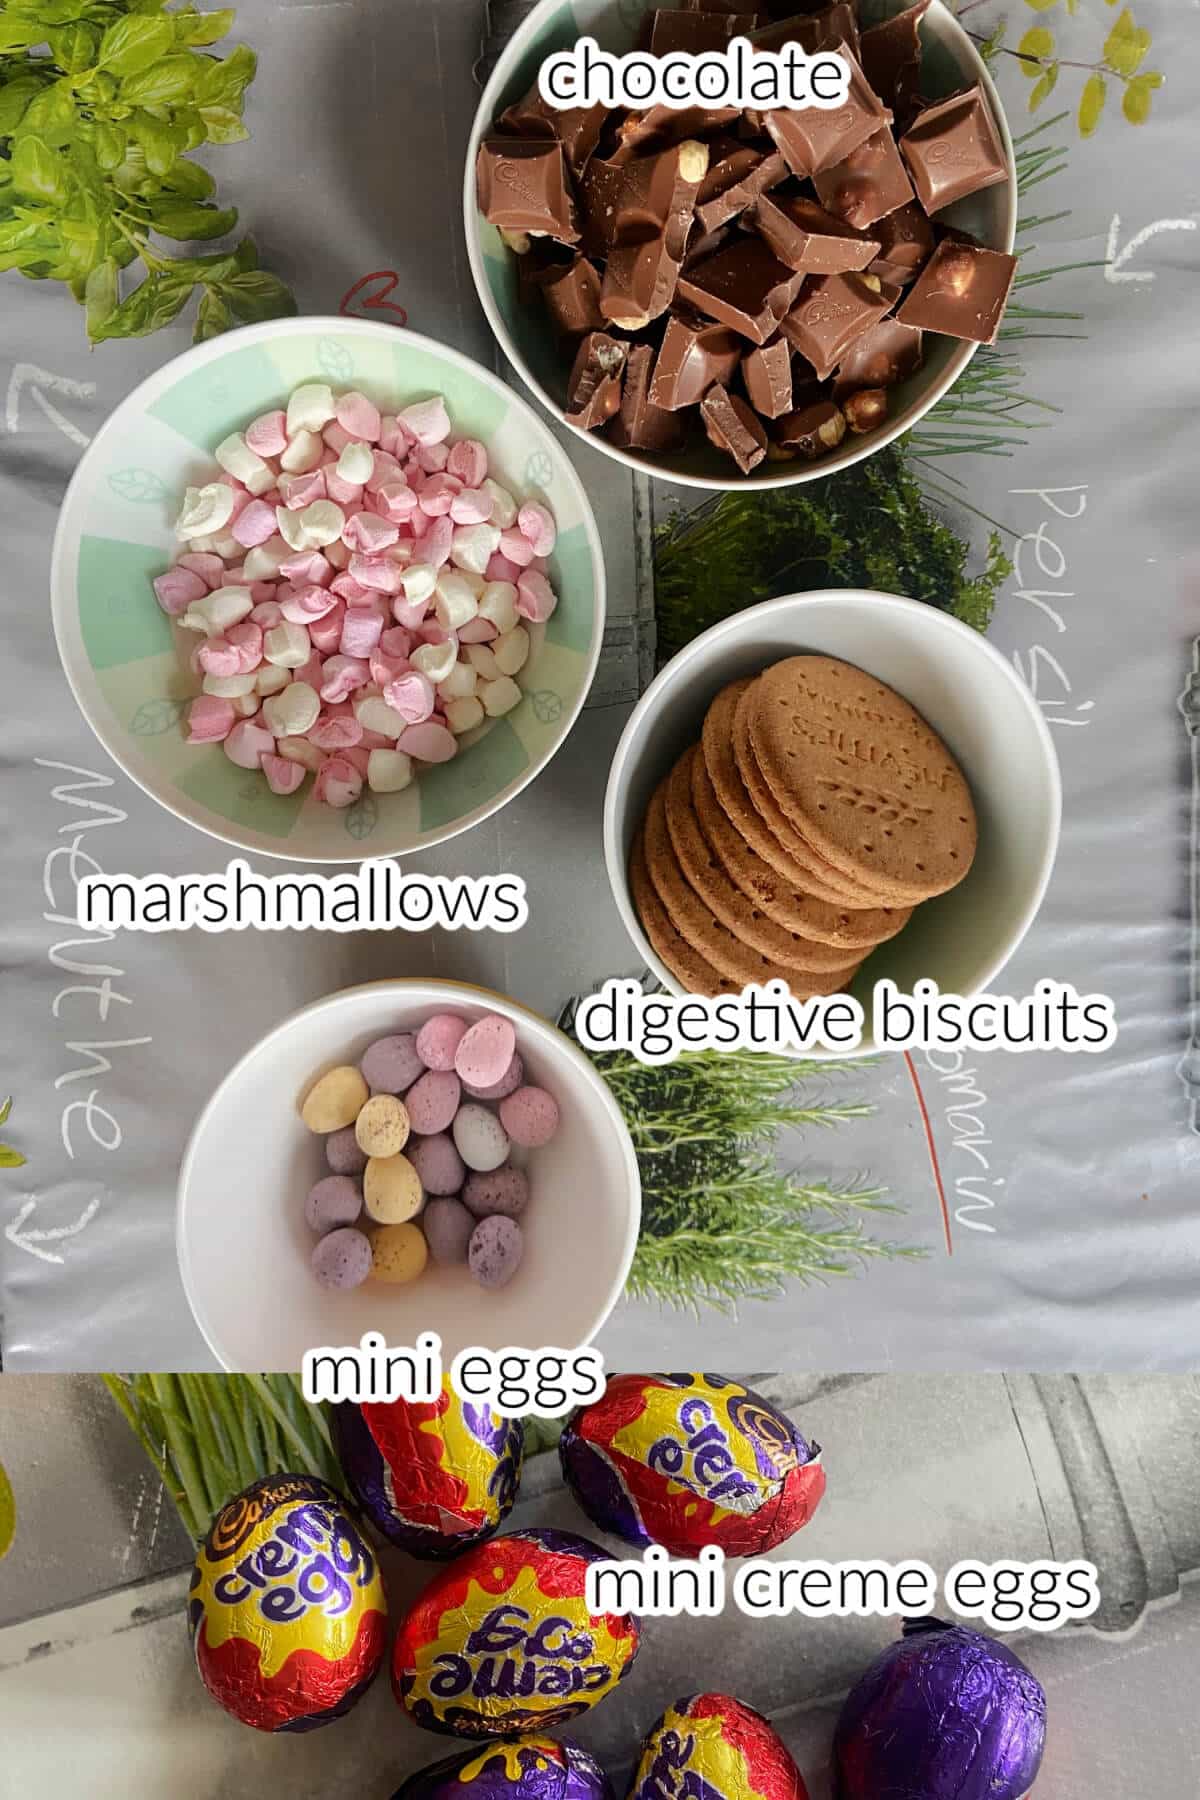 Ingredients used to make mini egg rocky road.